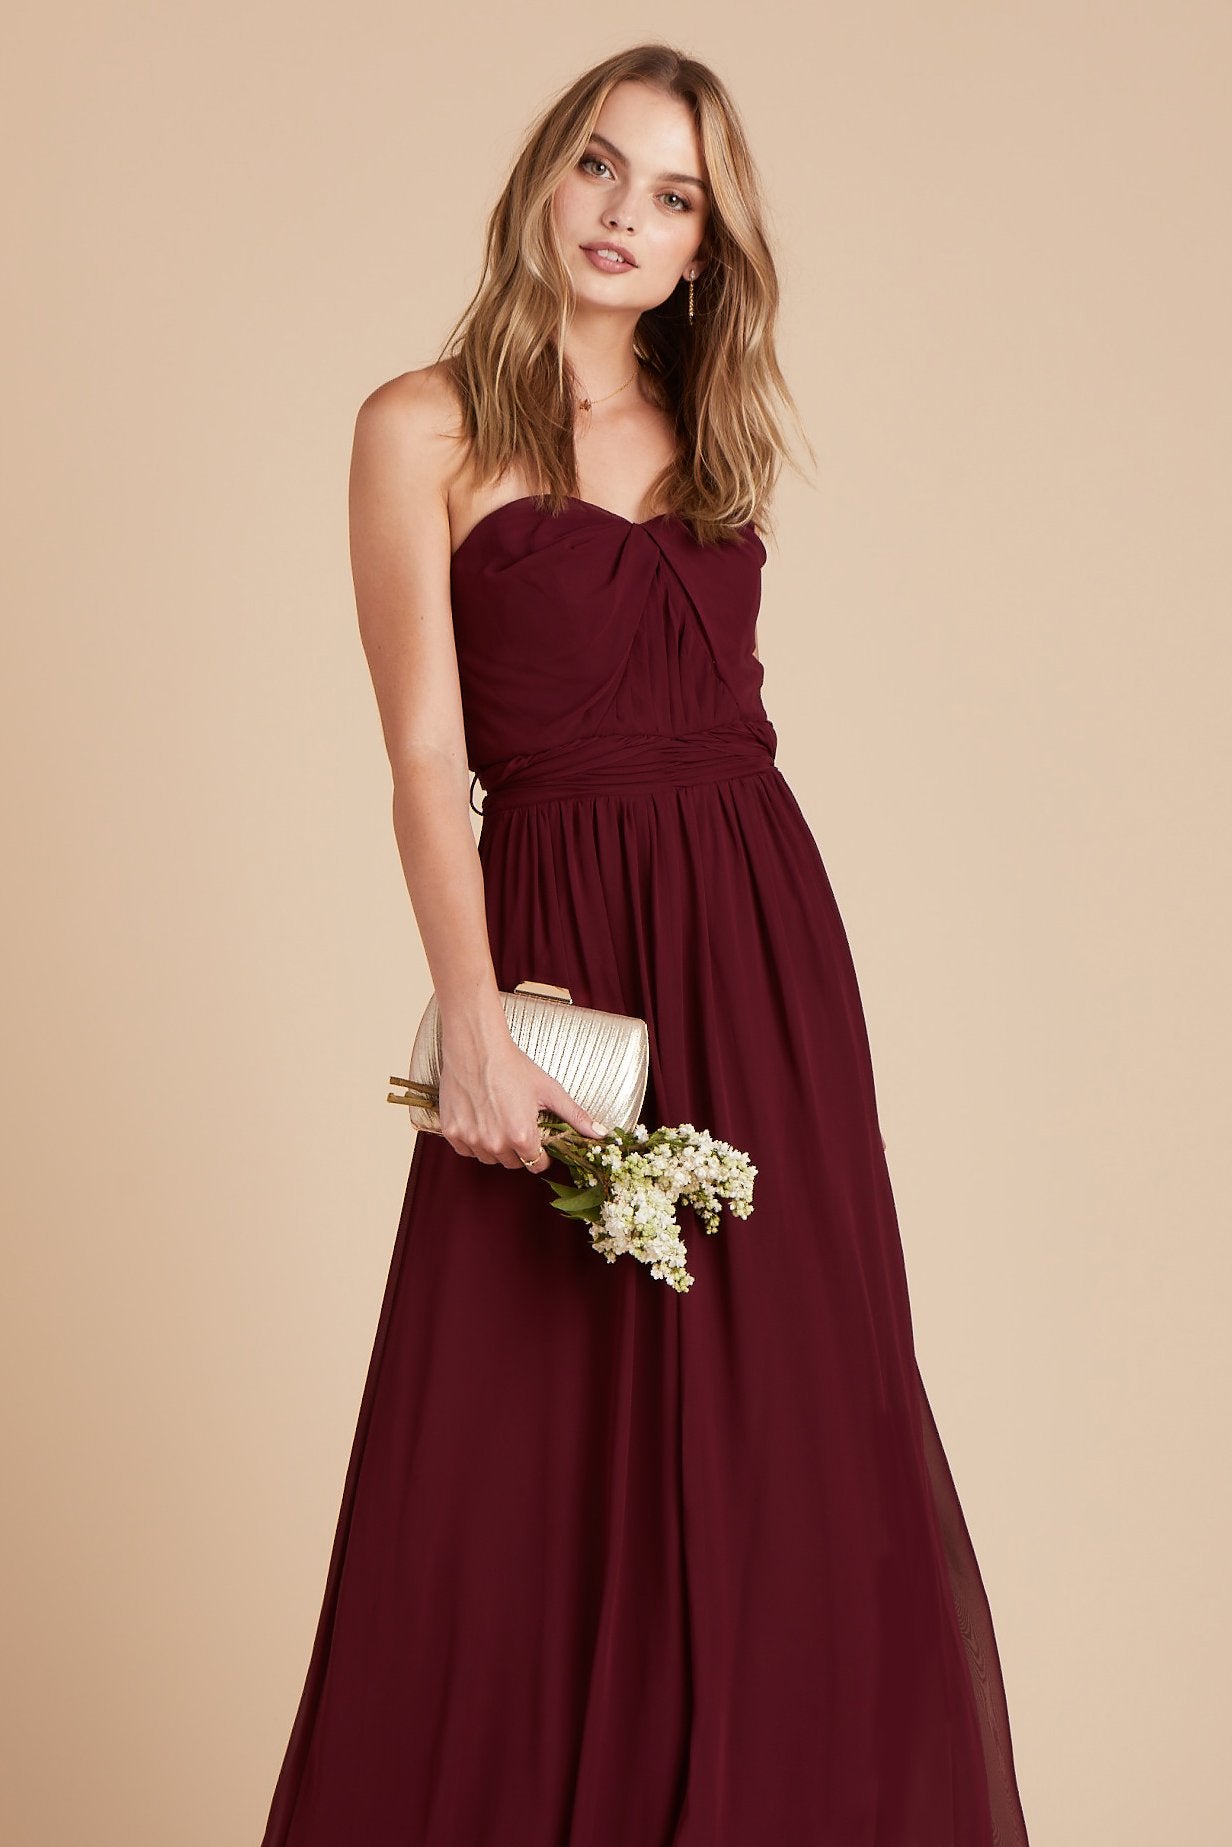 Chicky convertible bridesmaid dress in cabernet burgundy mesh by Birdy Grey, front view